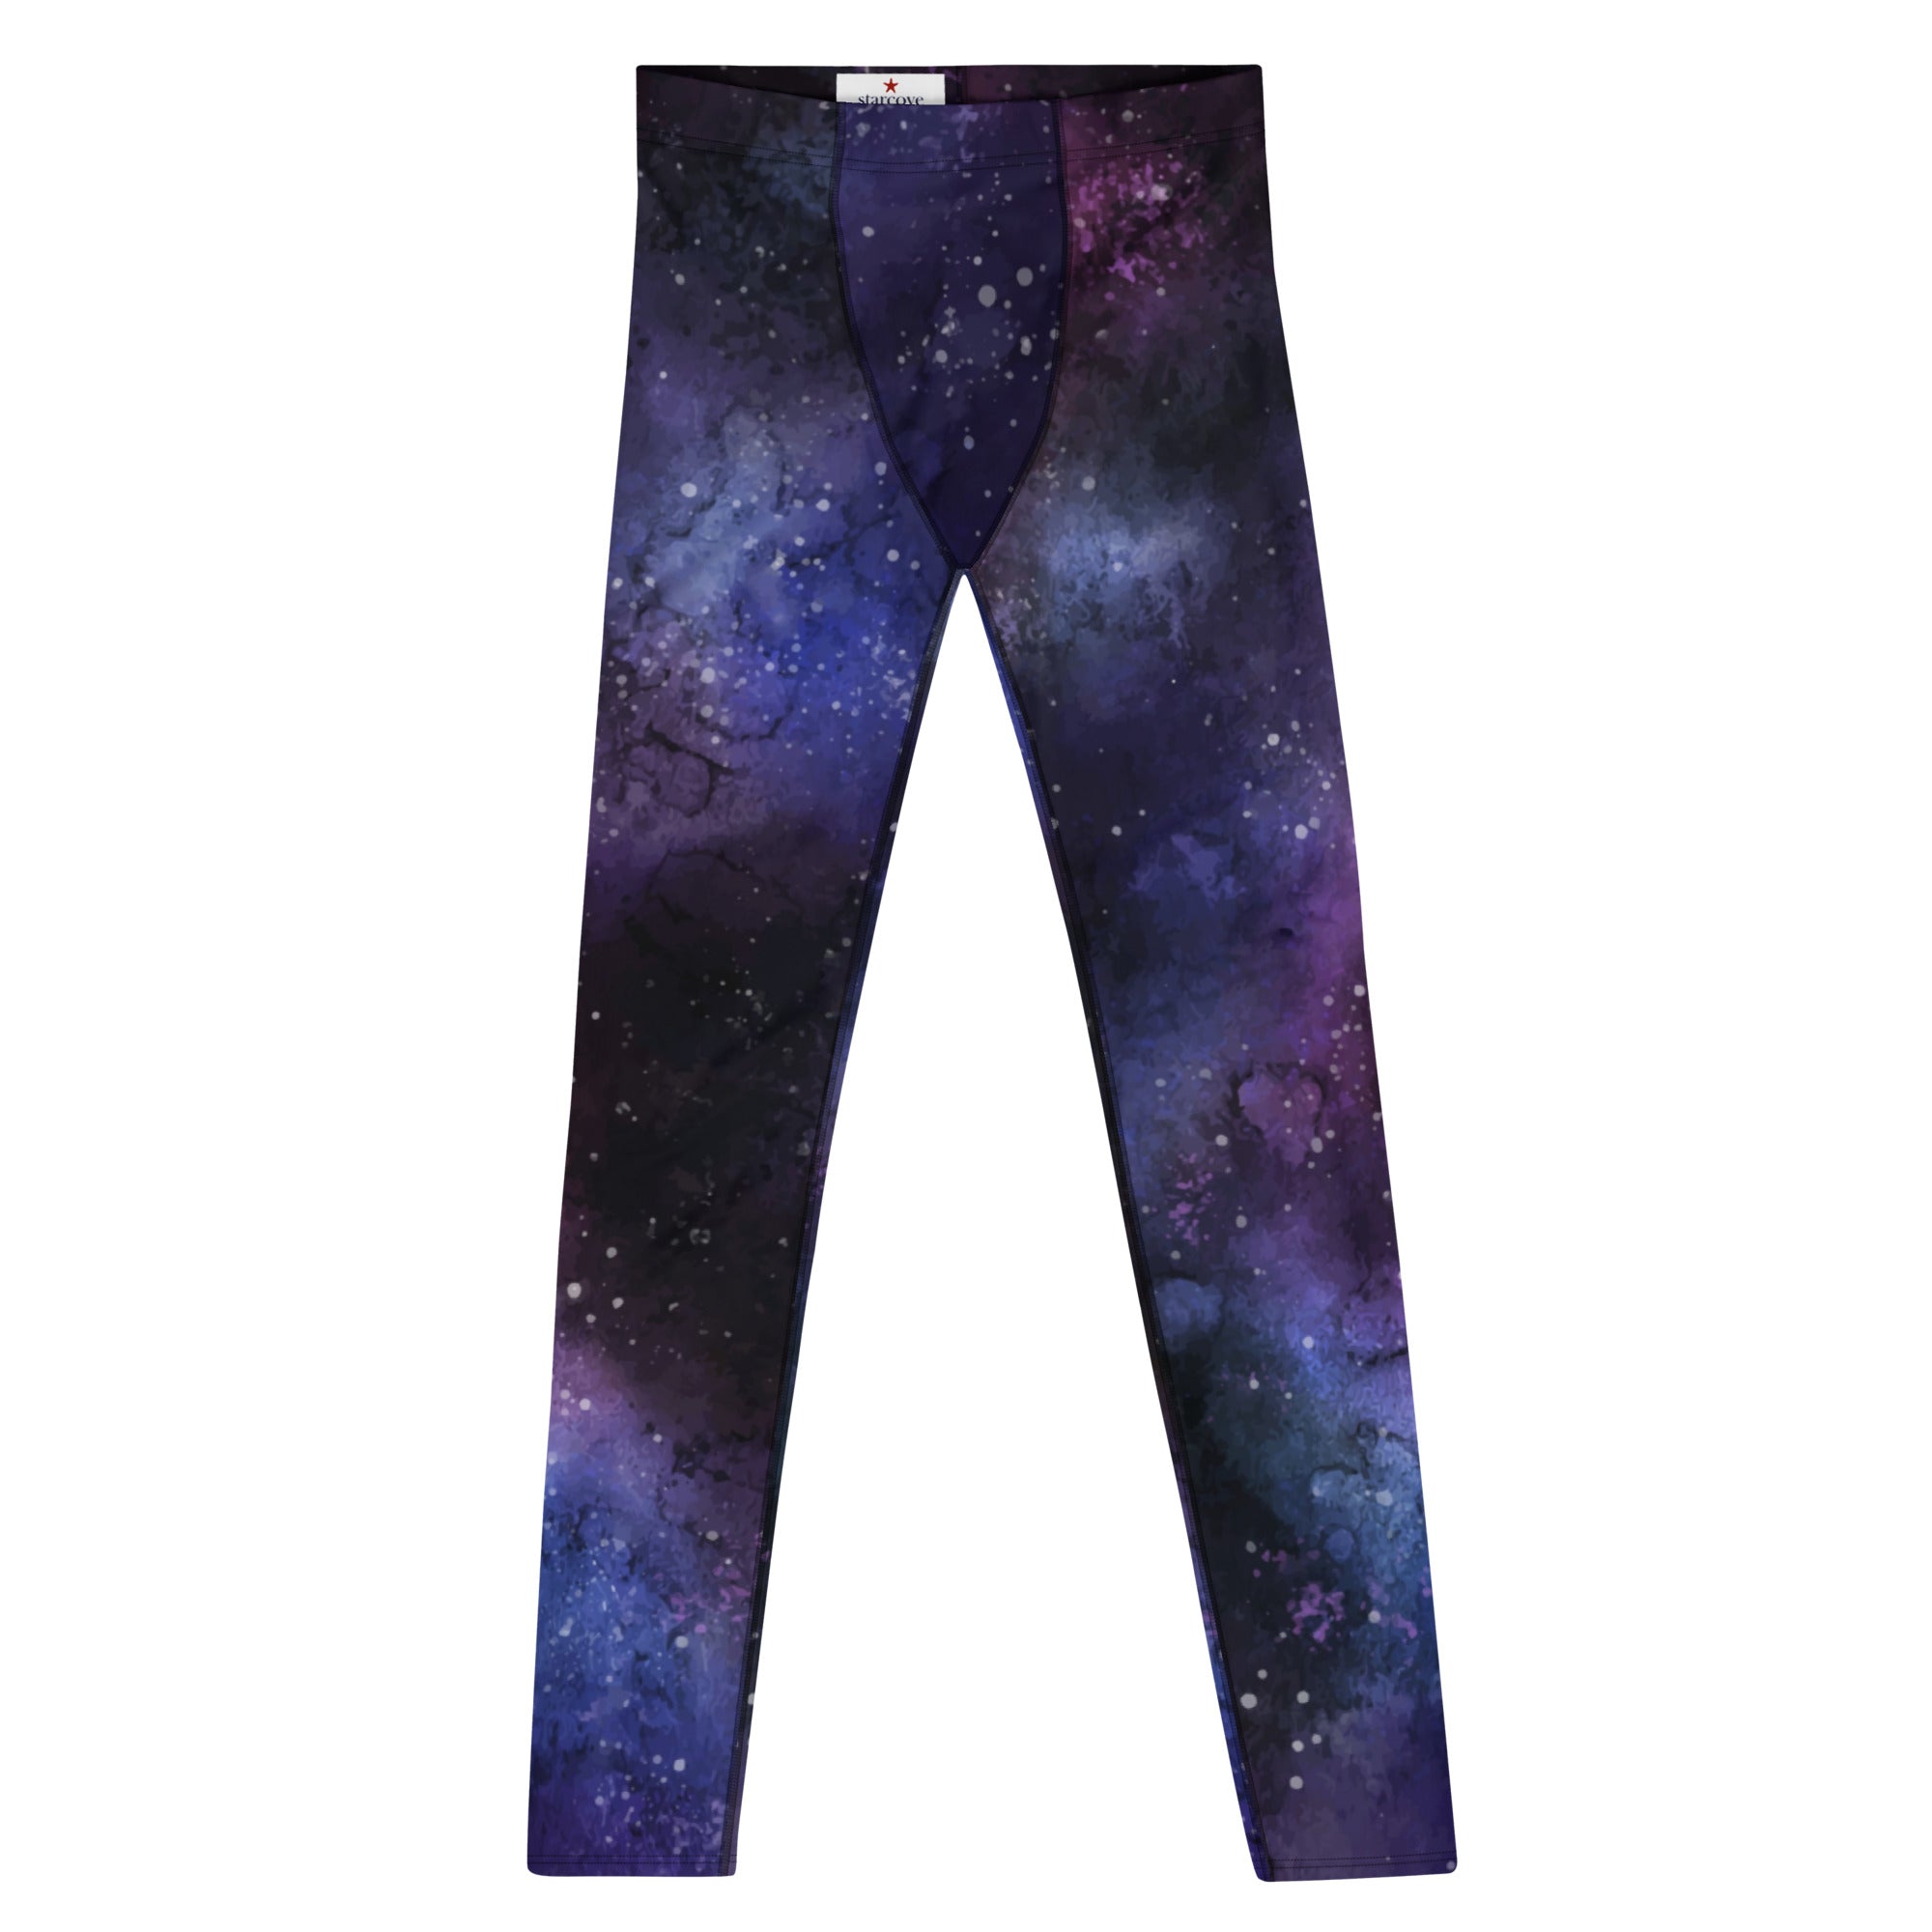 Discover more than 250 galaxy sports leggings best